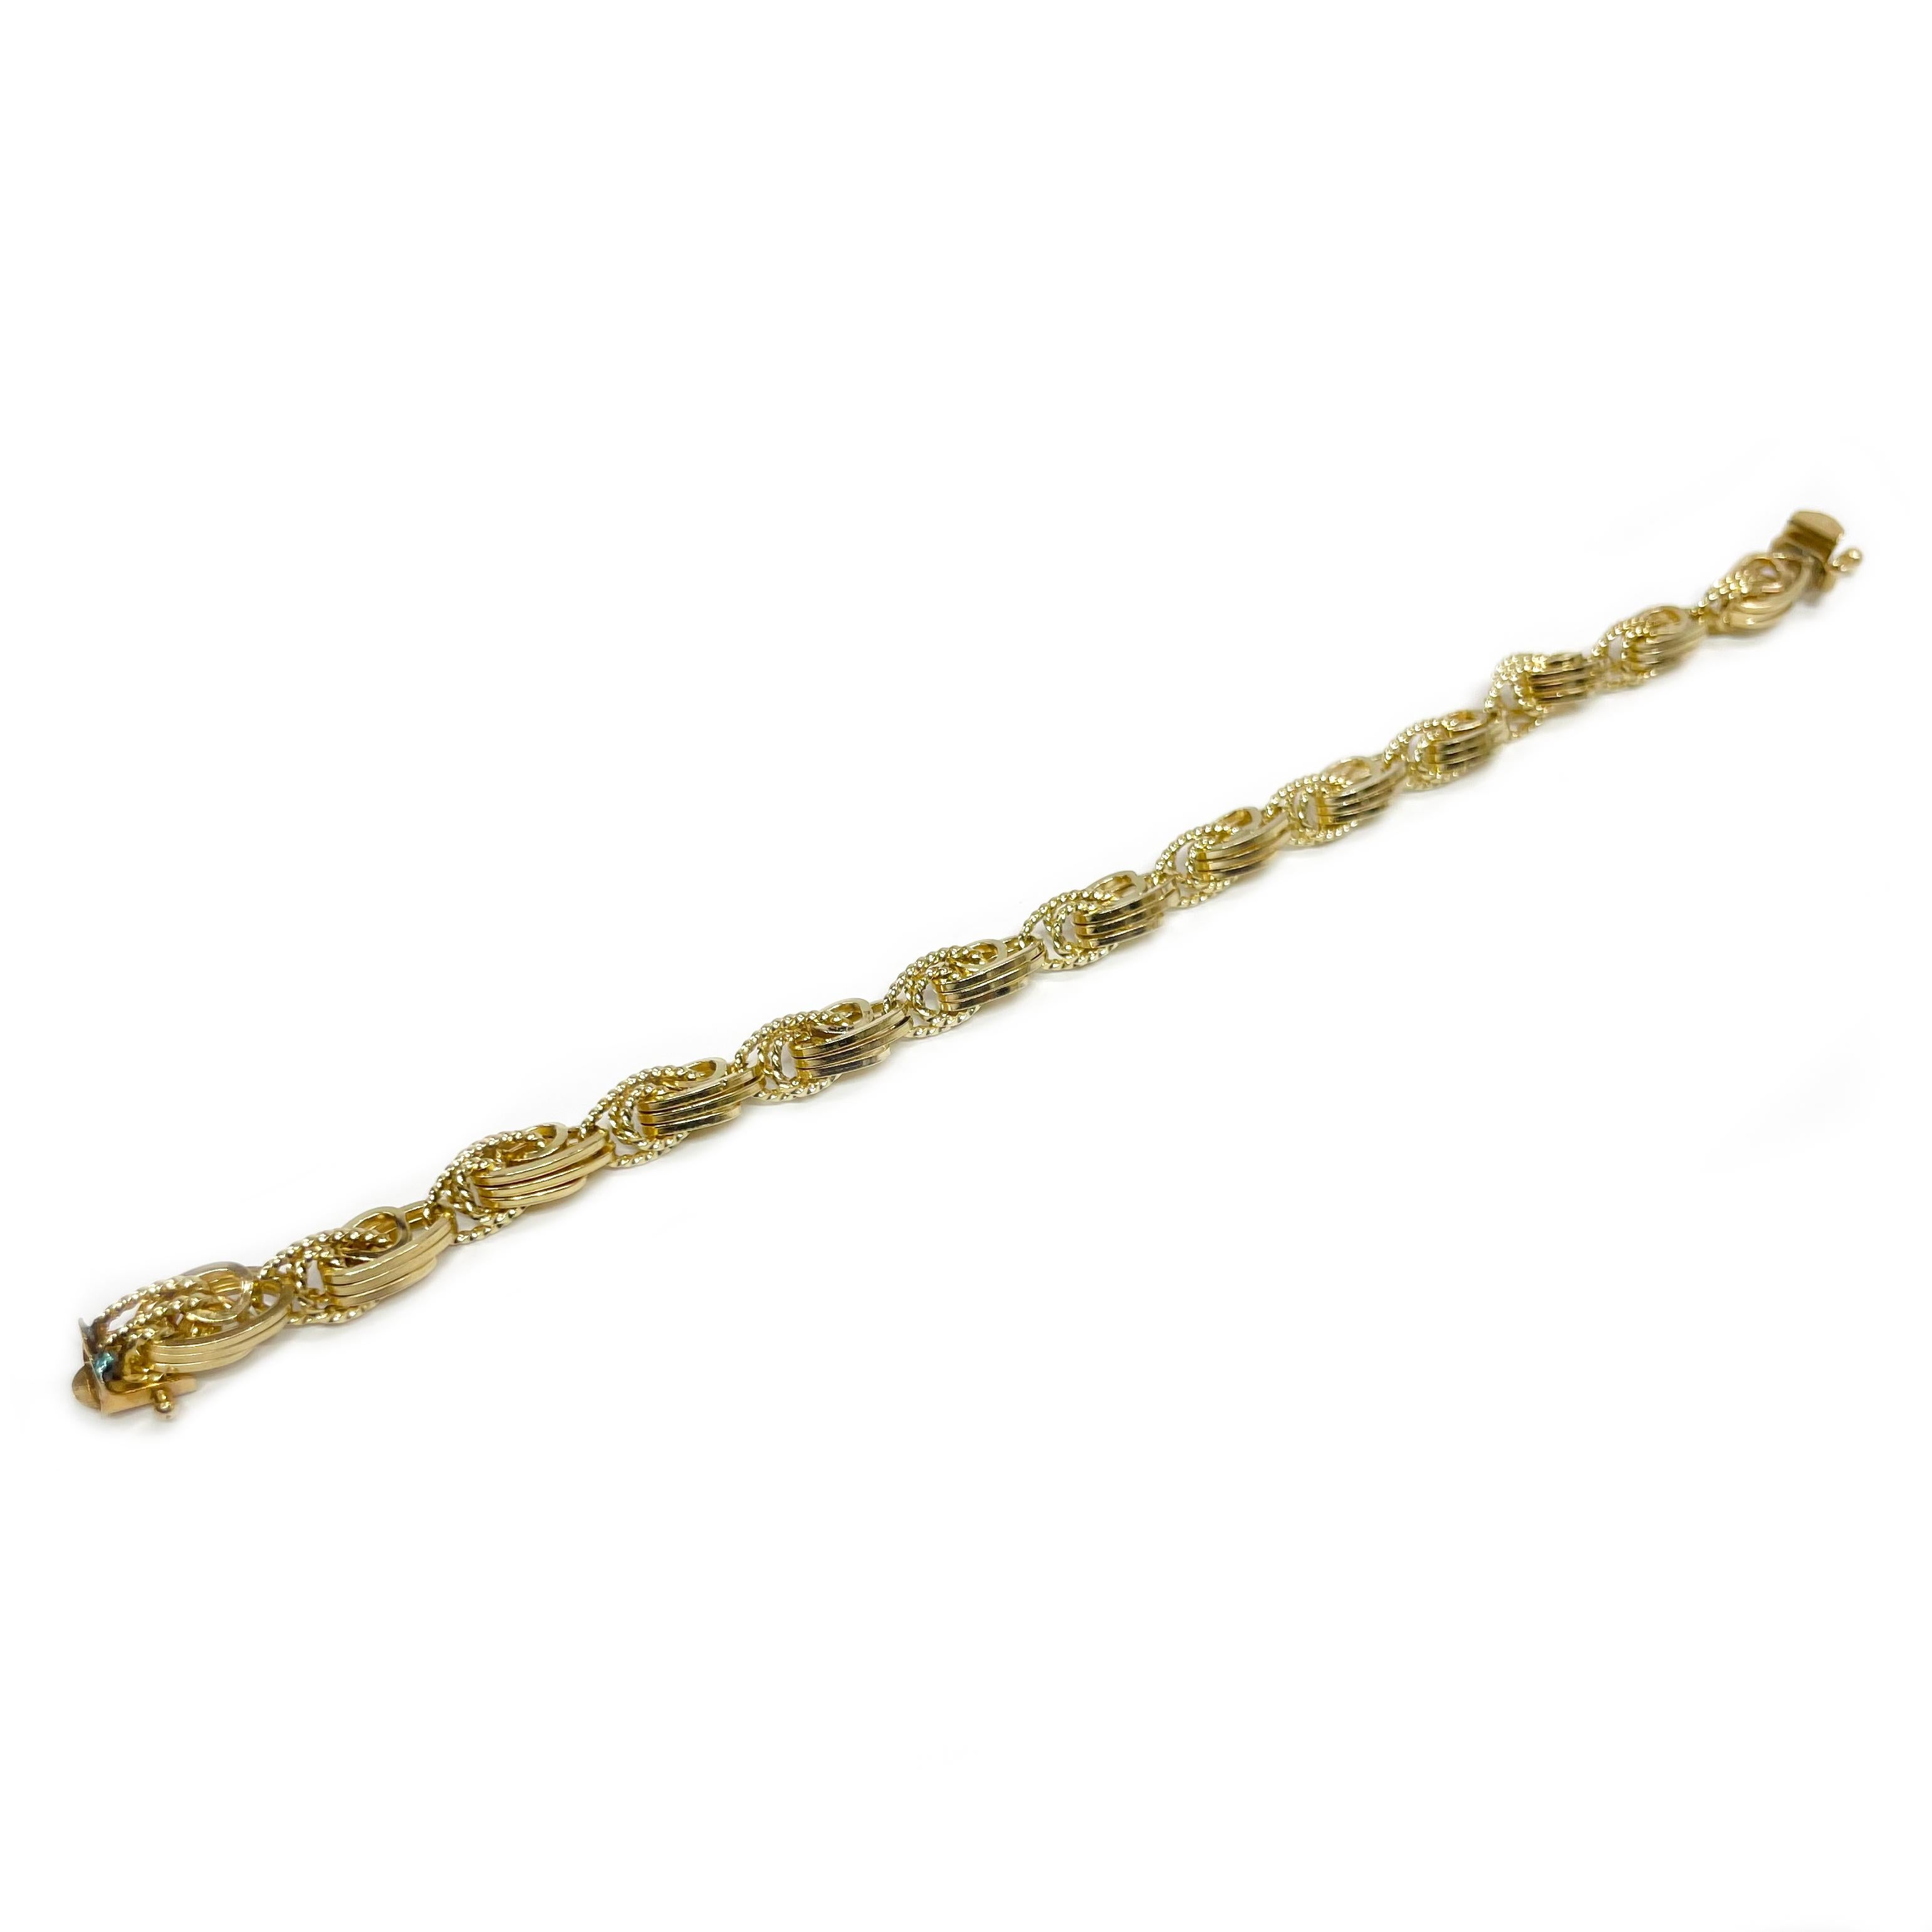 14 Karat Yellow Gold Triple Link Bracelet. The bracelet features yellow gold triple links in both textured and smooth finishes. The bracelet is 0.25